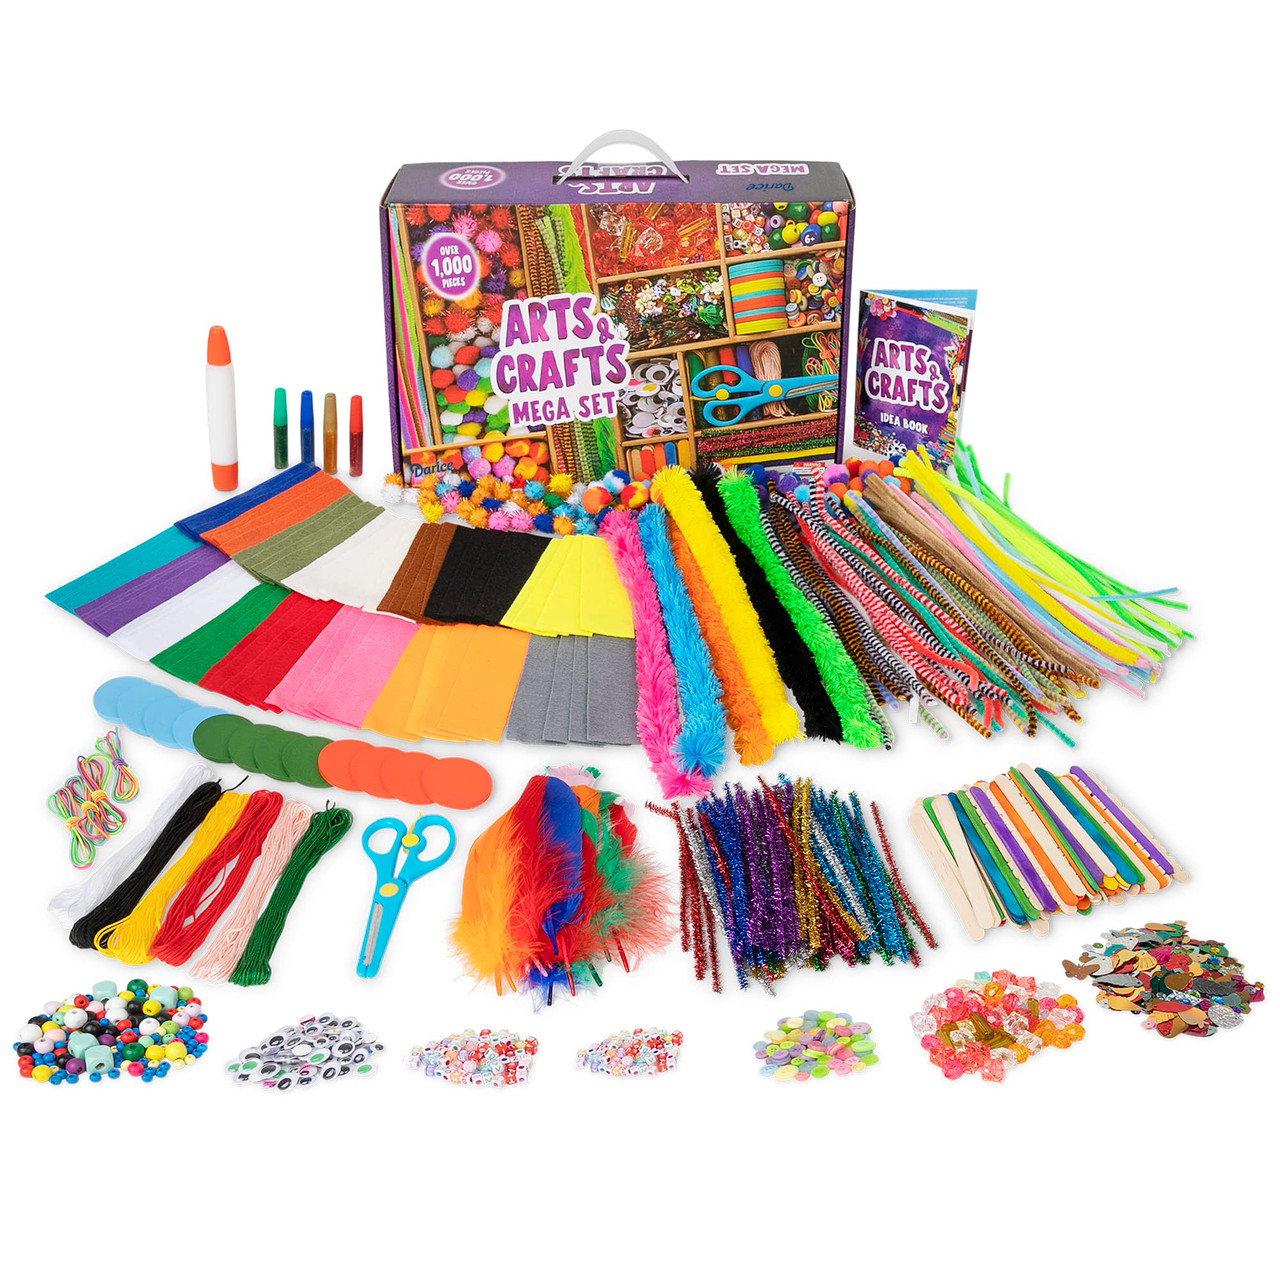 Darice Arts and Crafts Kit - 500+ Piece Kids Craft Supplies & Materials, Art  Supplies Box for Girls & Boys Age 4 5 6 7 8 9 - Toys 4 U